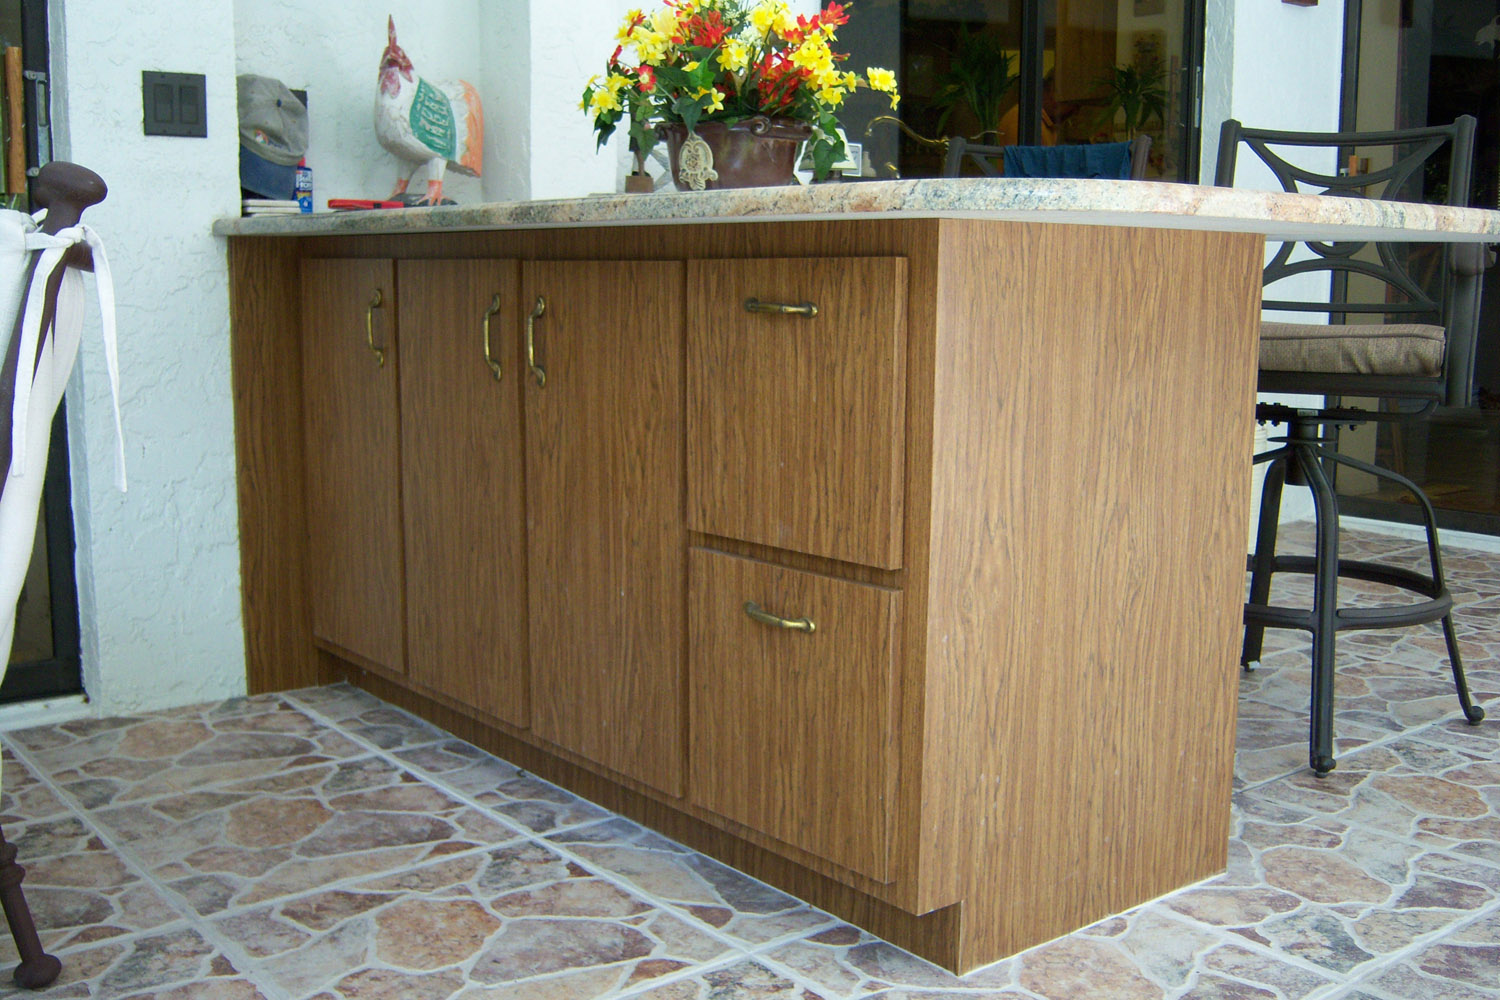 Chris' Cabinets: Specialty Cabinets